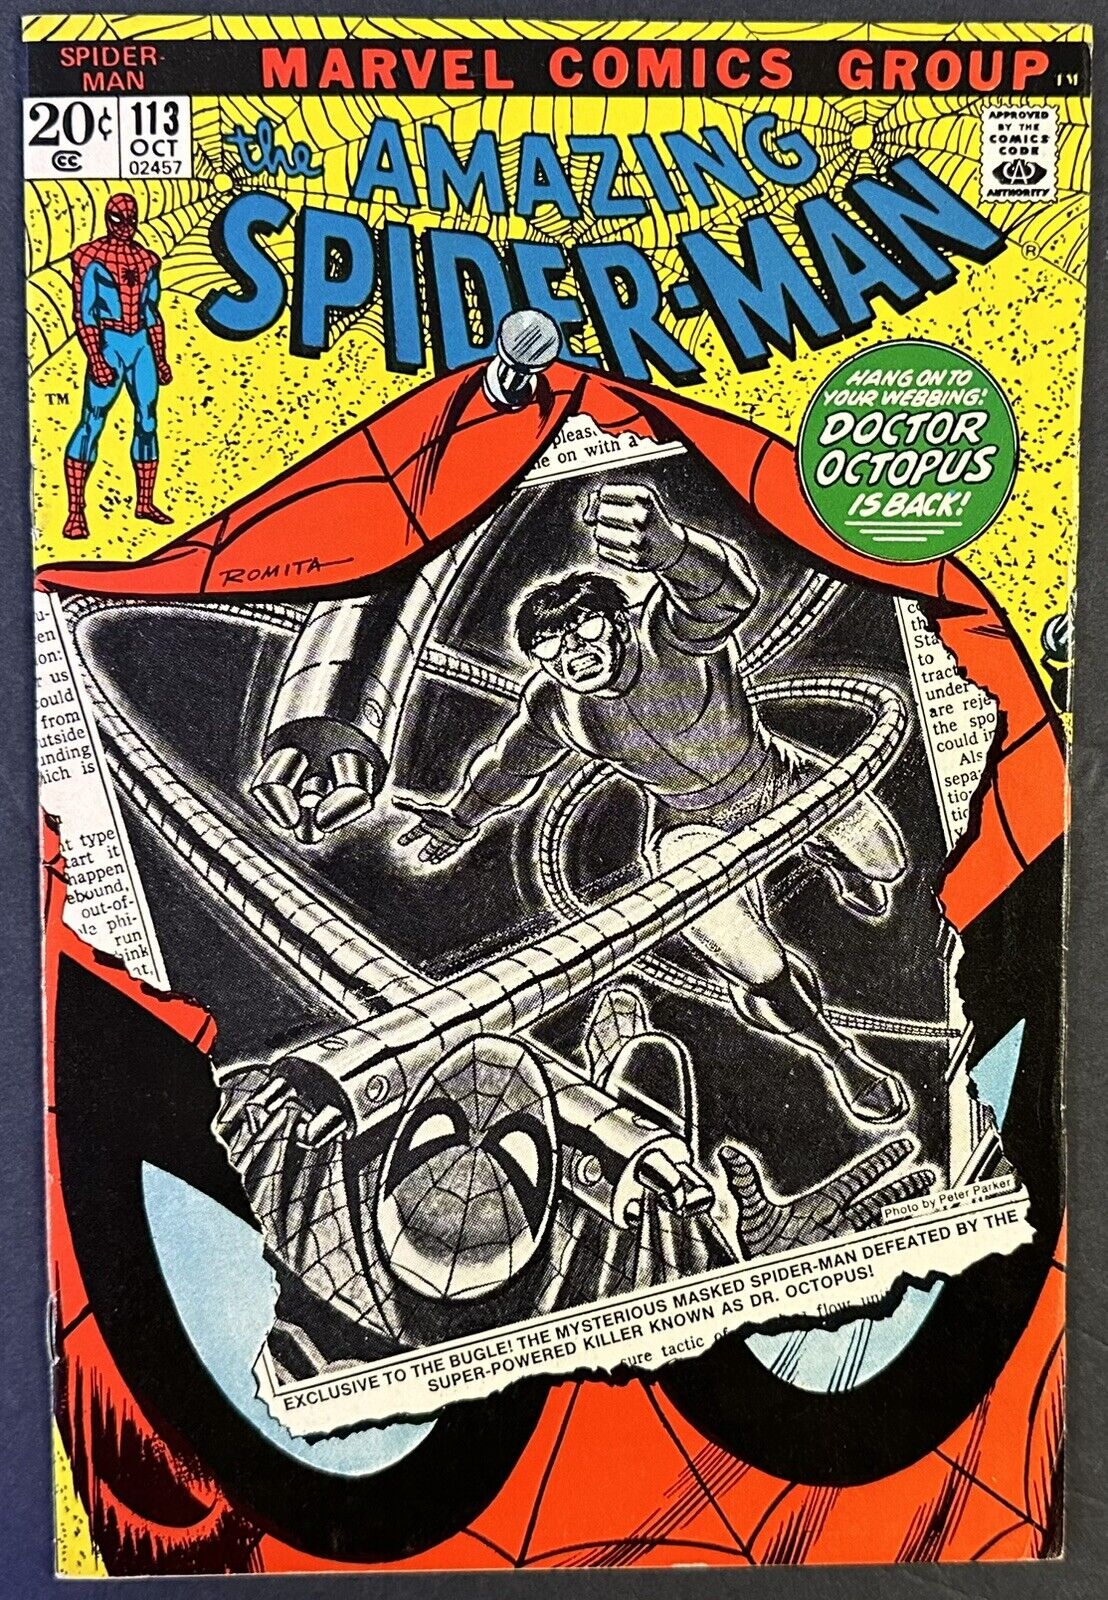 THE AMAZING SPIDER-MAN #113 (MARVEL,1972) 1ST HAMMERHEAD APPEARANCE BRONZE AGE ~